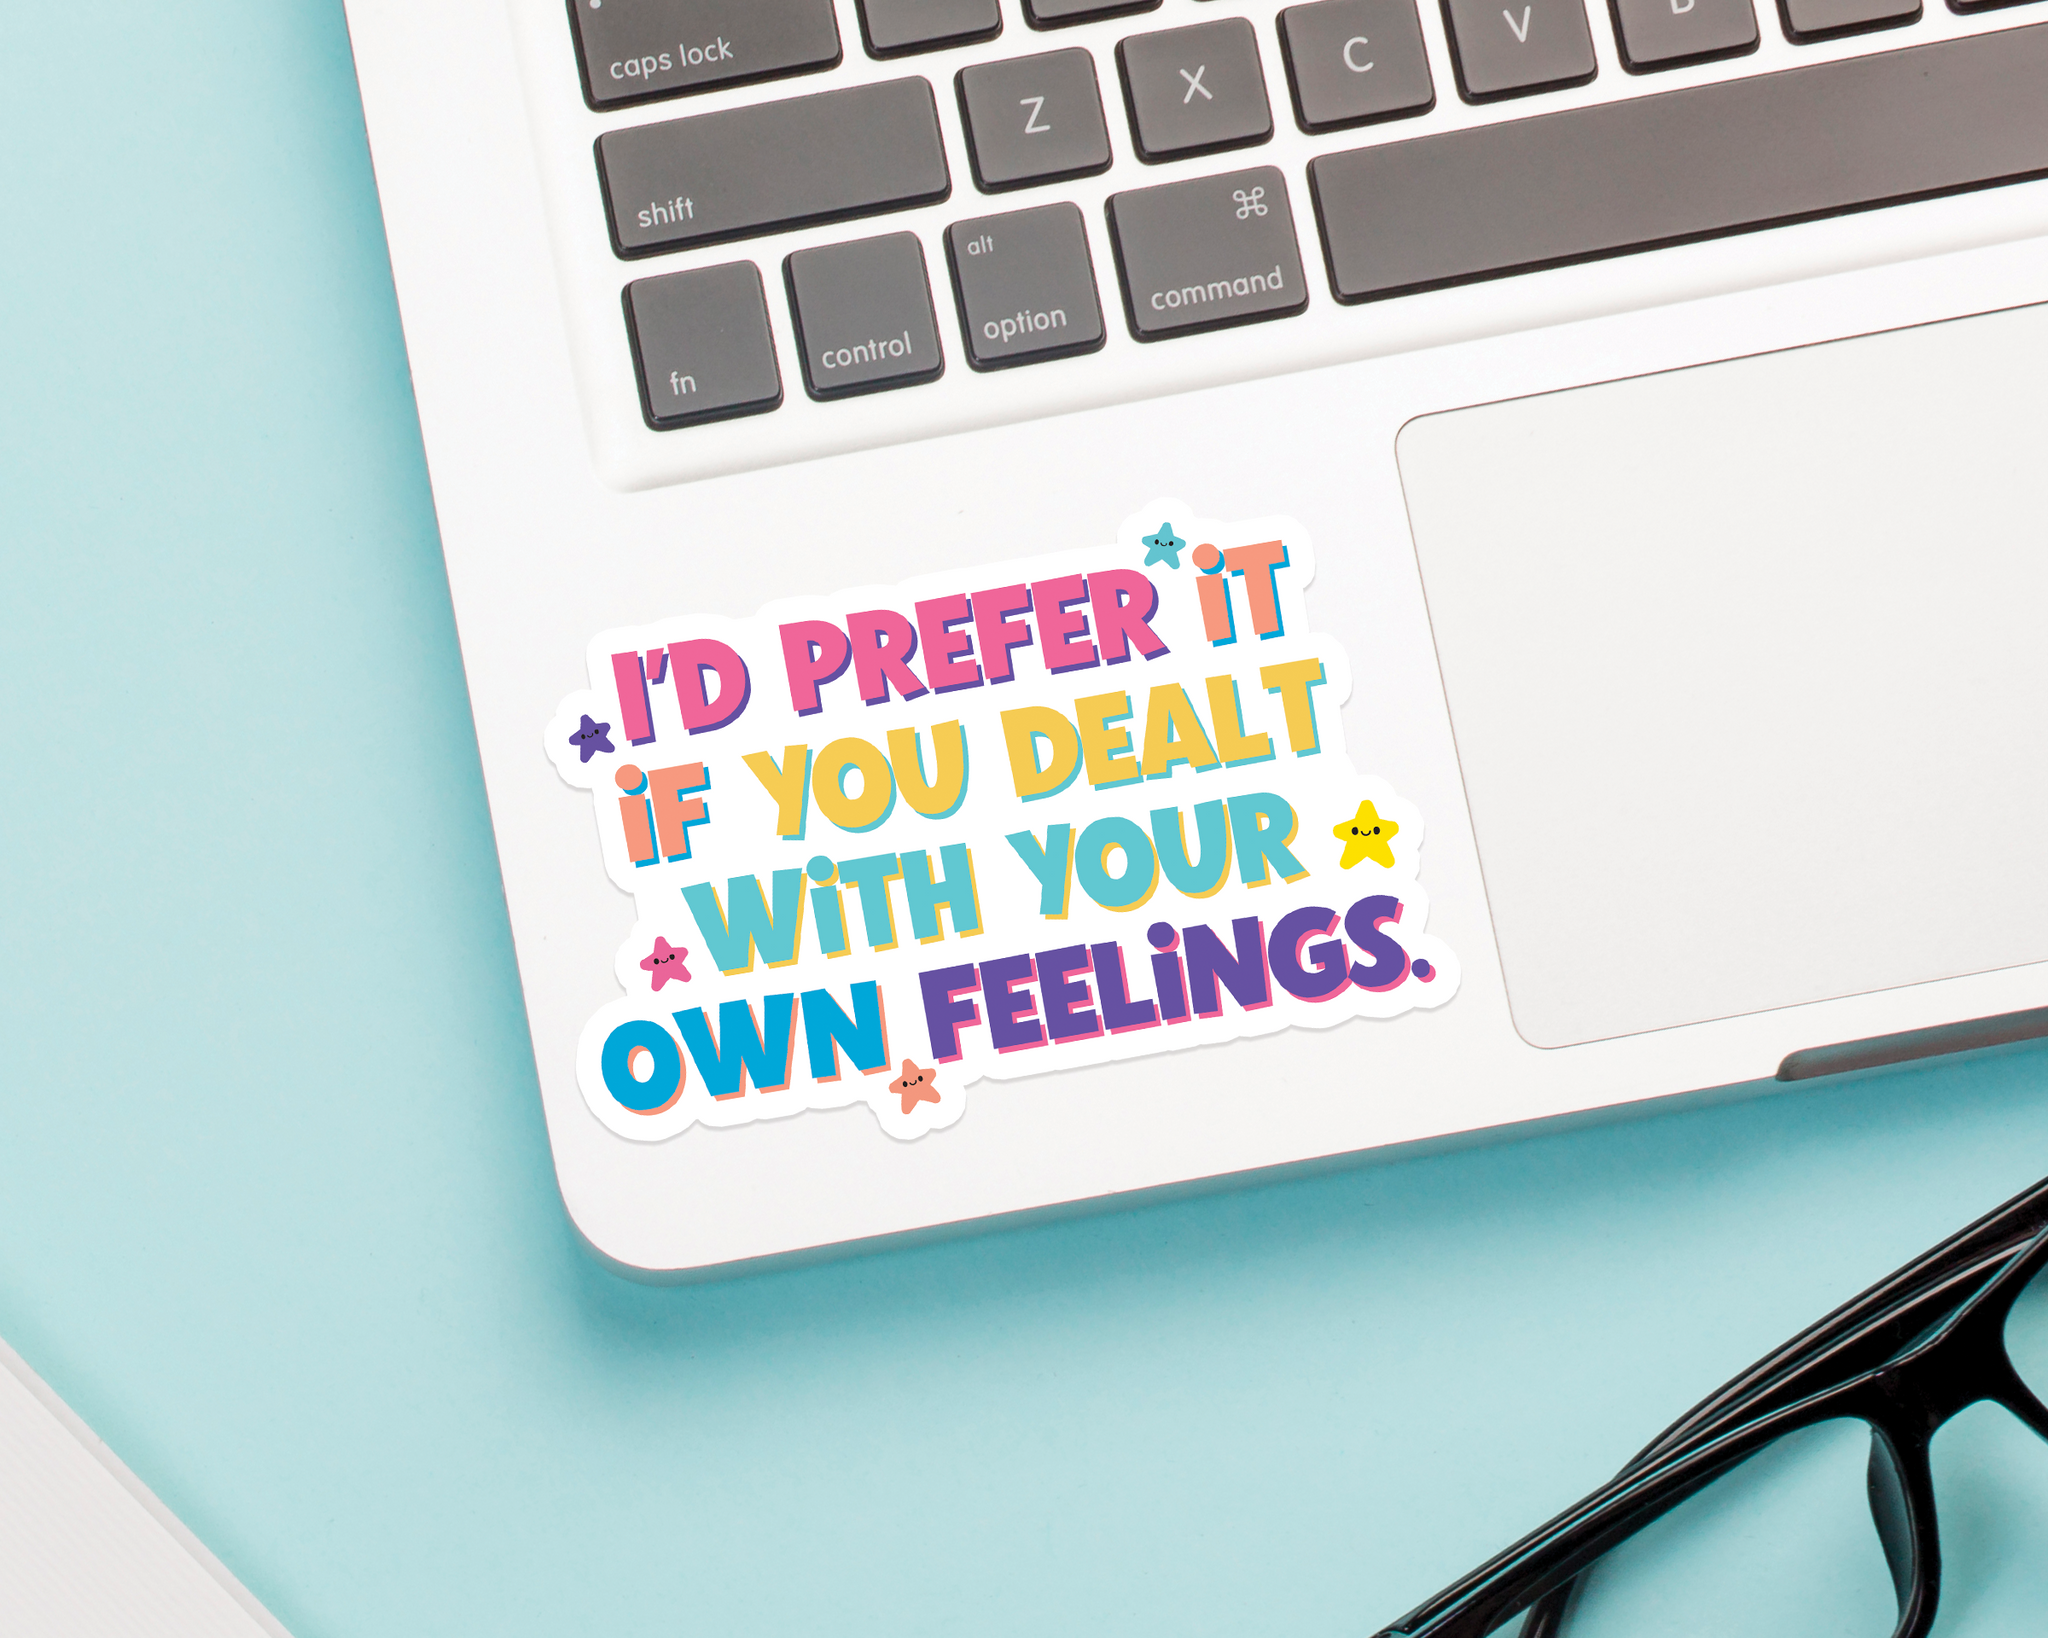 Deal With Your Own Feelings Sticker